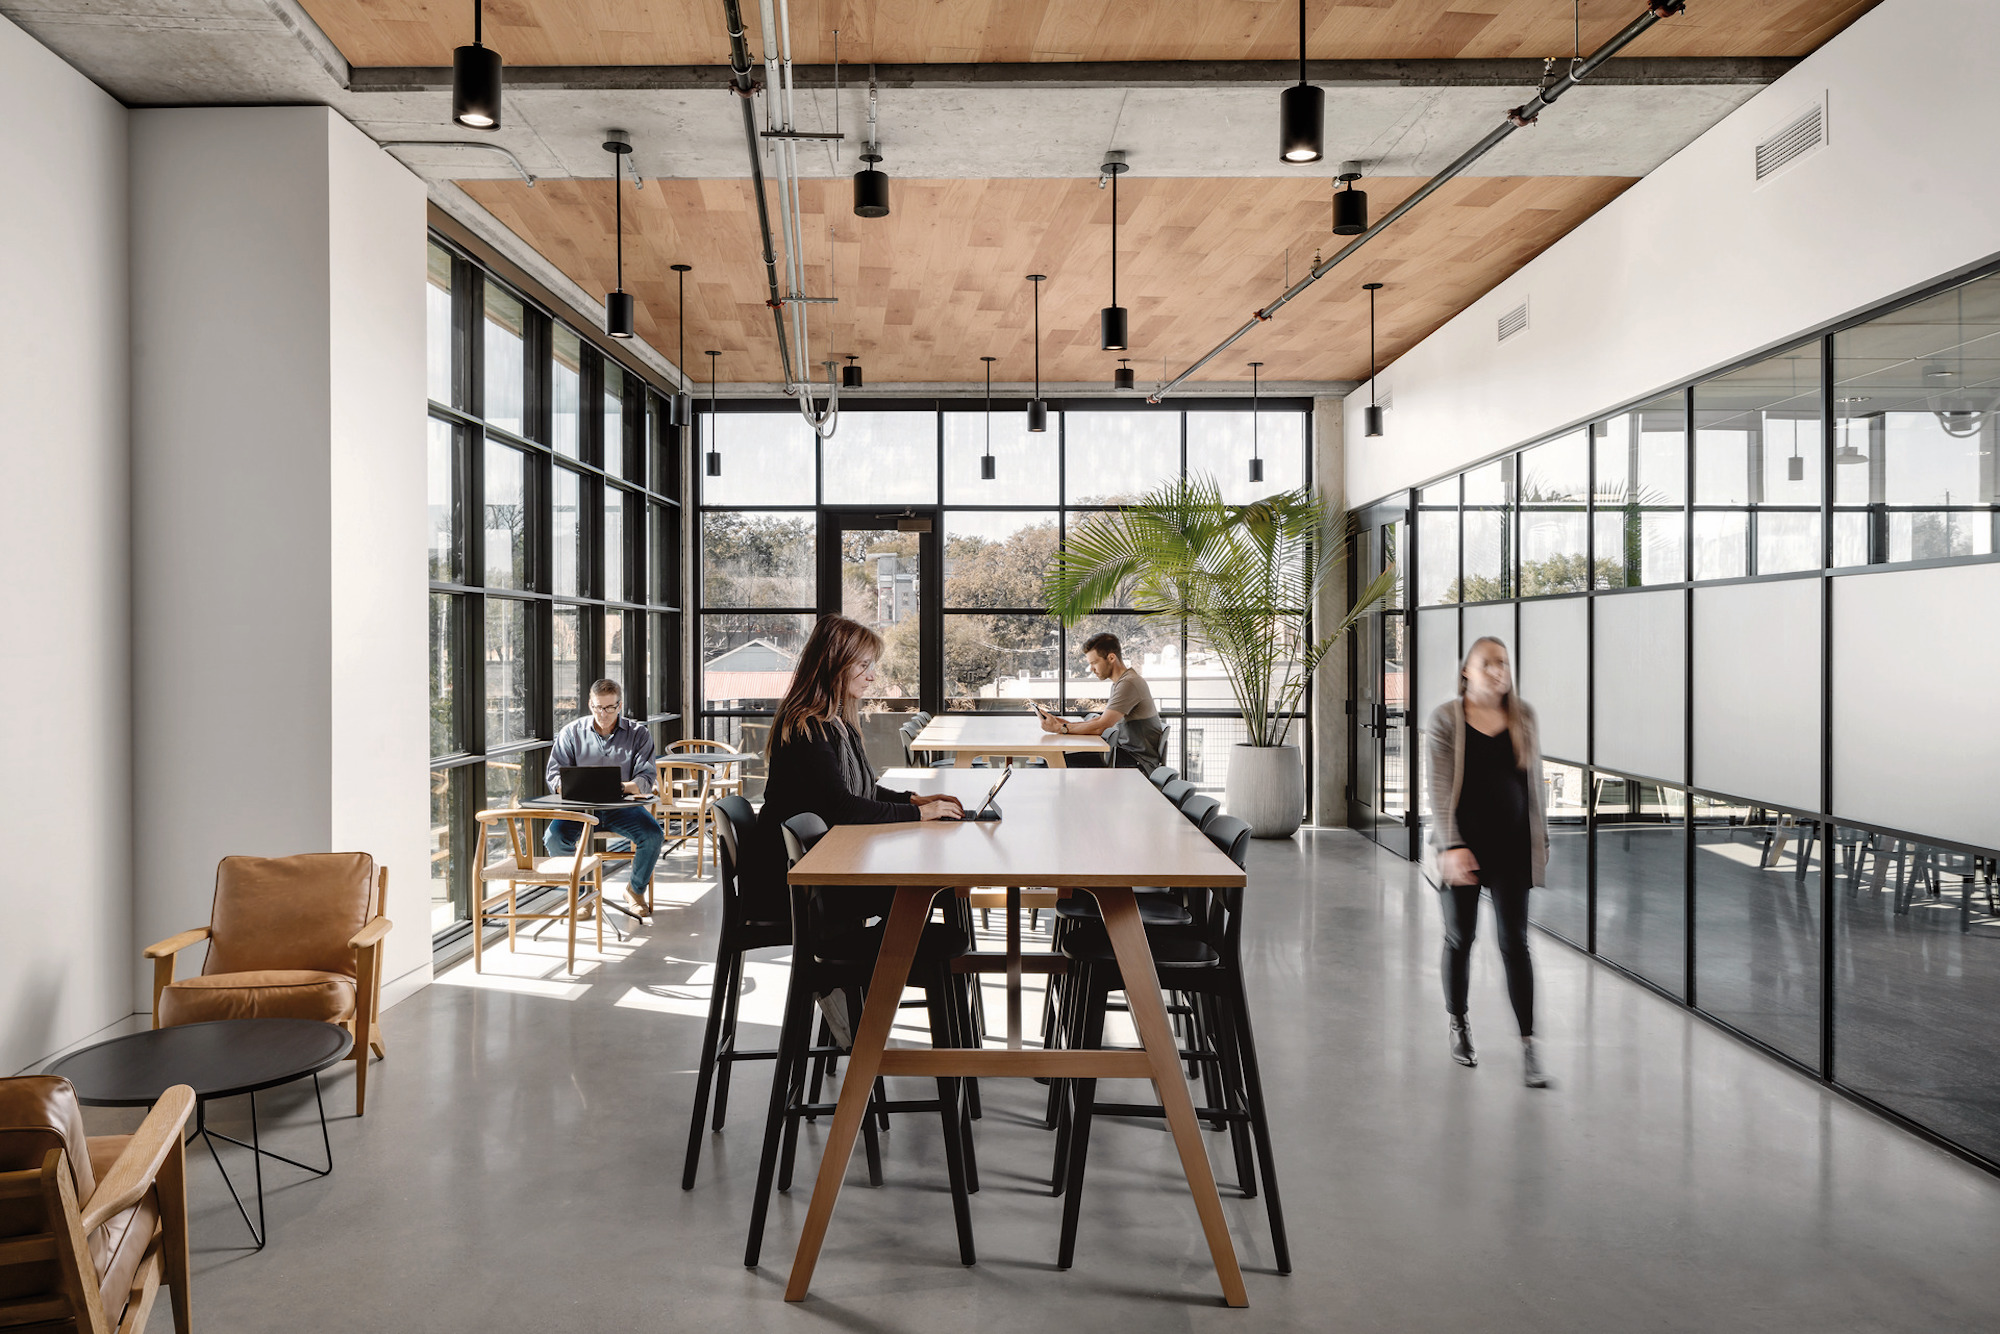 Global design consultancy frog sought to create an engaging workplace that celebrates its collaborative spirit for its new studio in Austin, Texas. Designed by Perkins&Will’s Austin studio